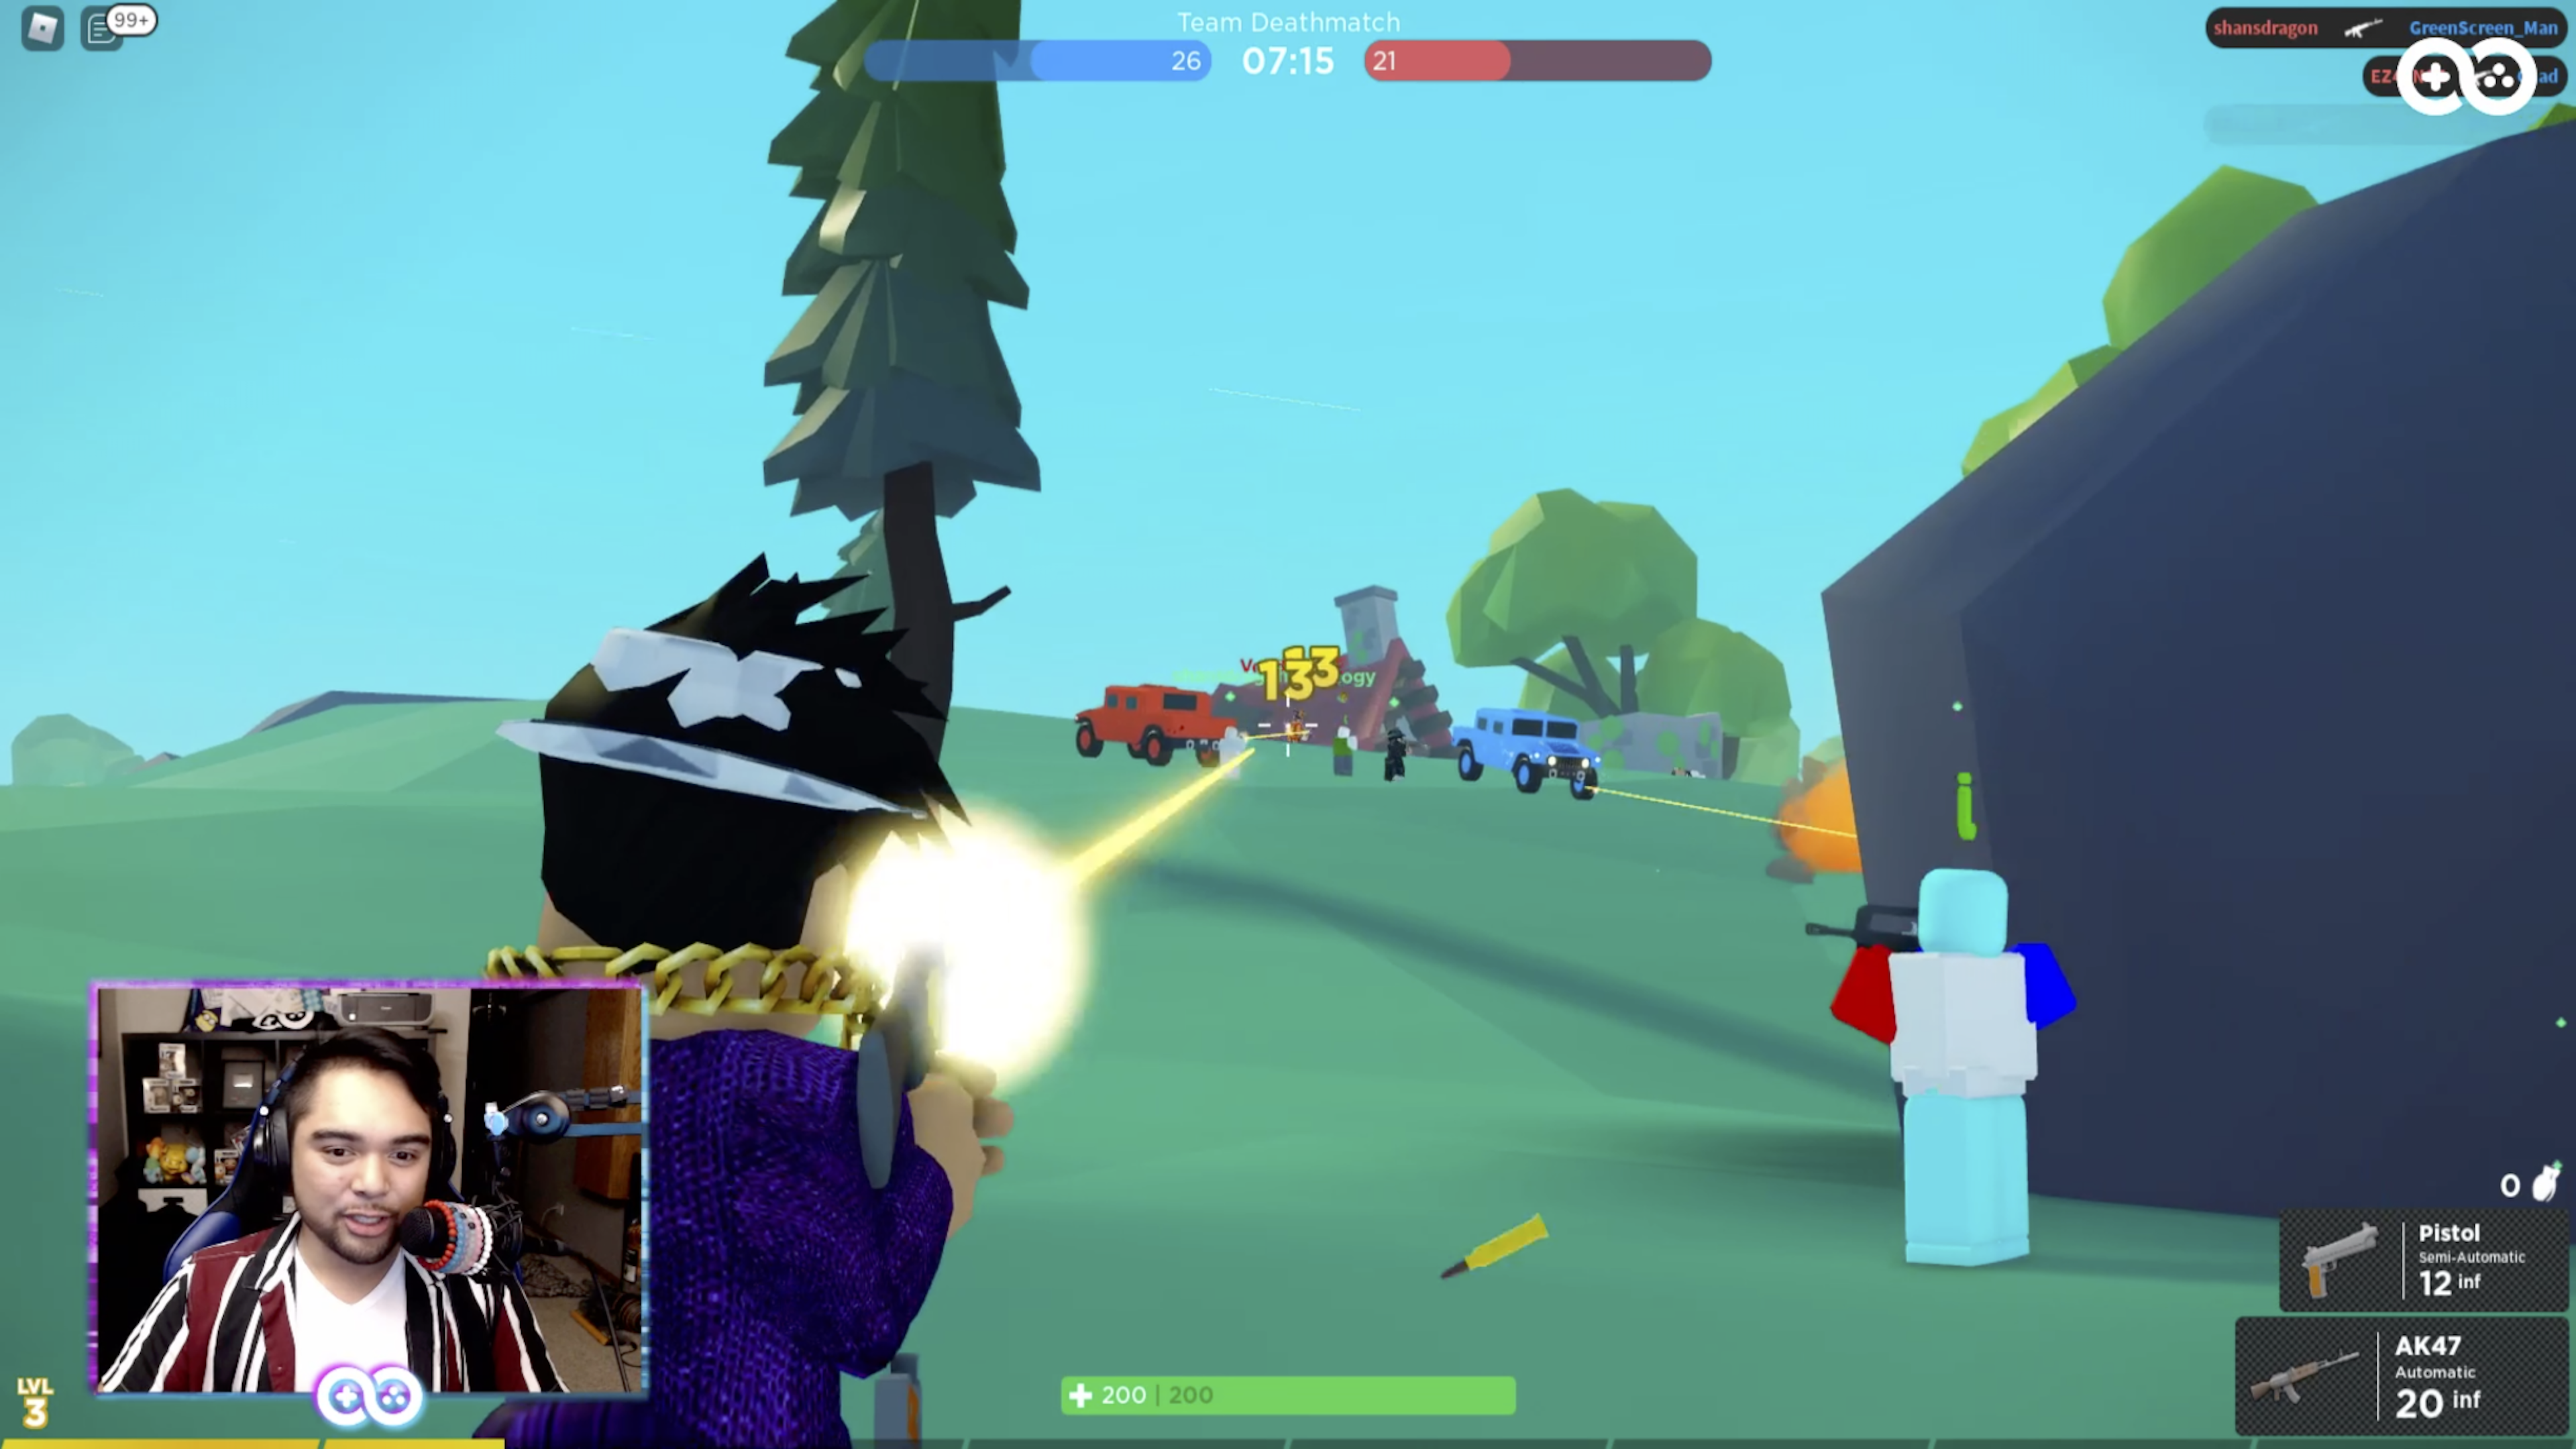 Roblox's metaverse is overhyped, a new report suggests